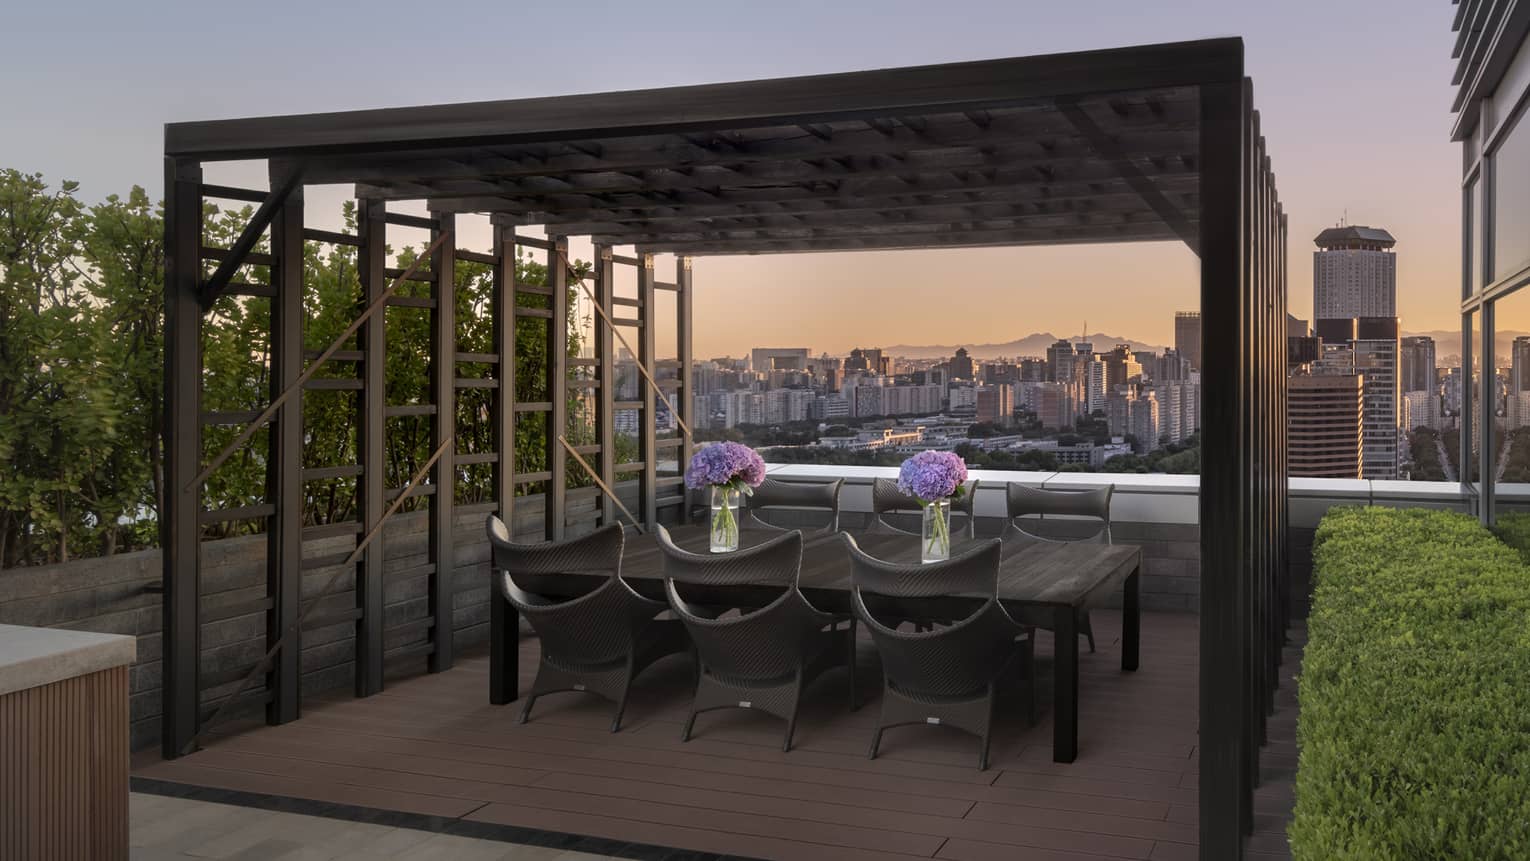 Outdoor city rooftop terrace, with dining table under a pergola